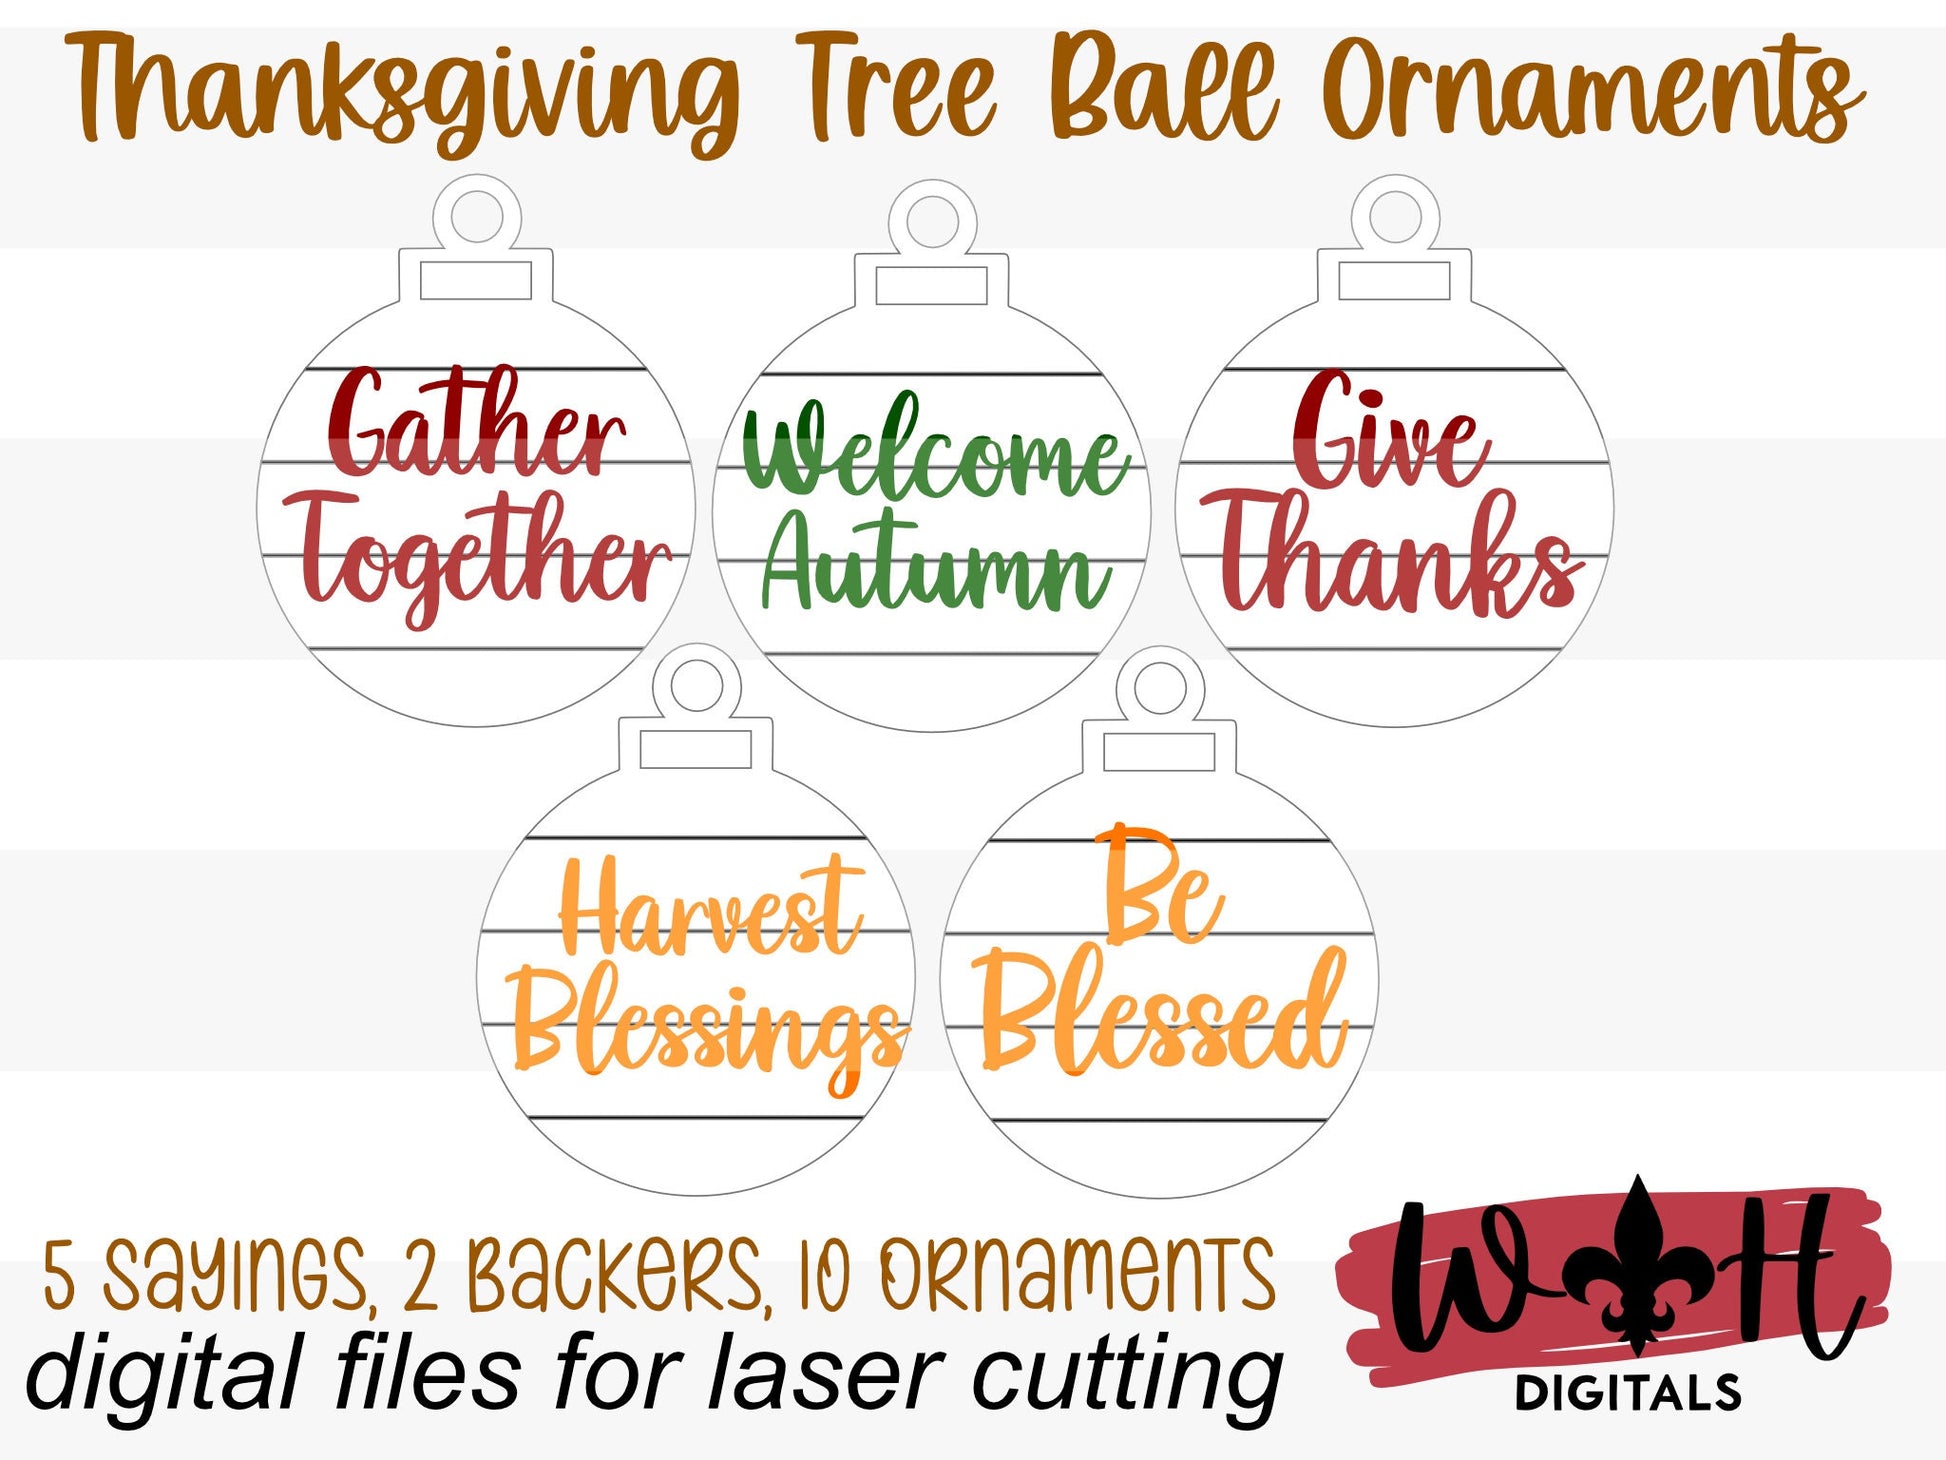 Thanksgiving Tree Ball Ornaments - Shiplap Farmhouse Style - Digital Files for Sign Making - SVG Cut File For Glowforge - Digital File